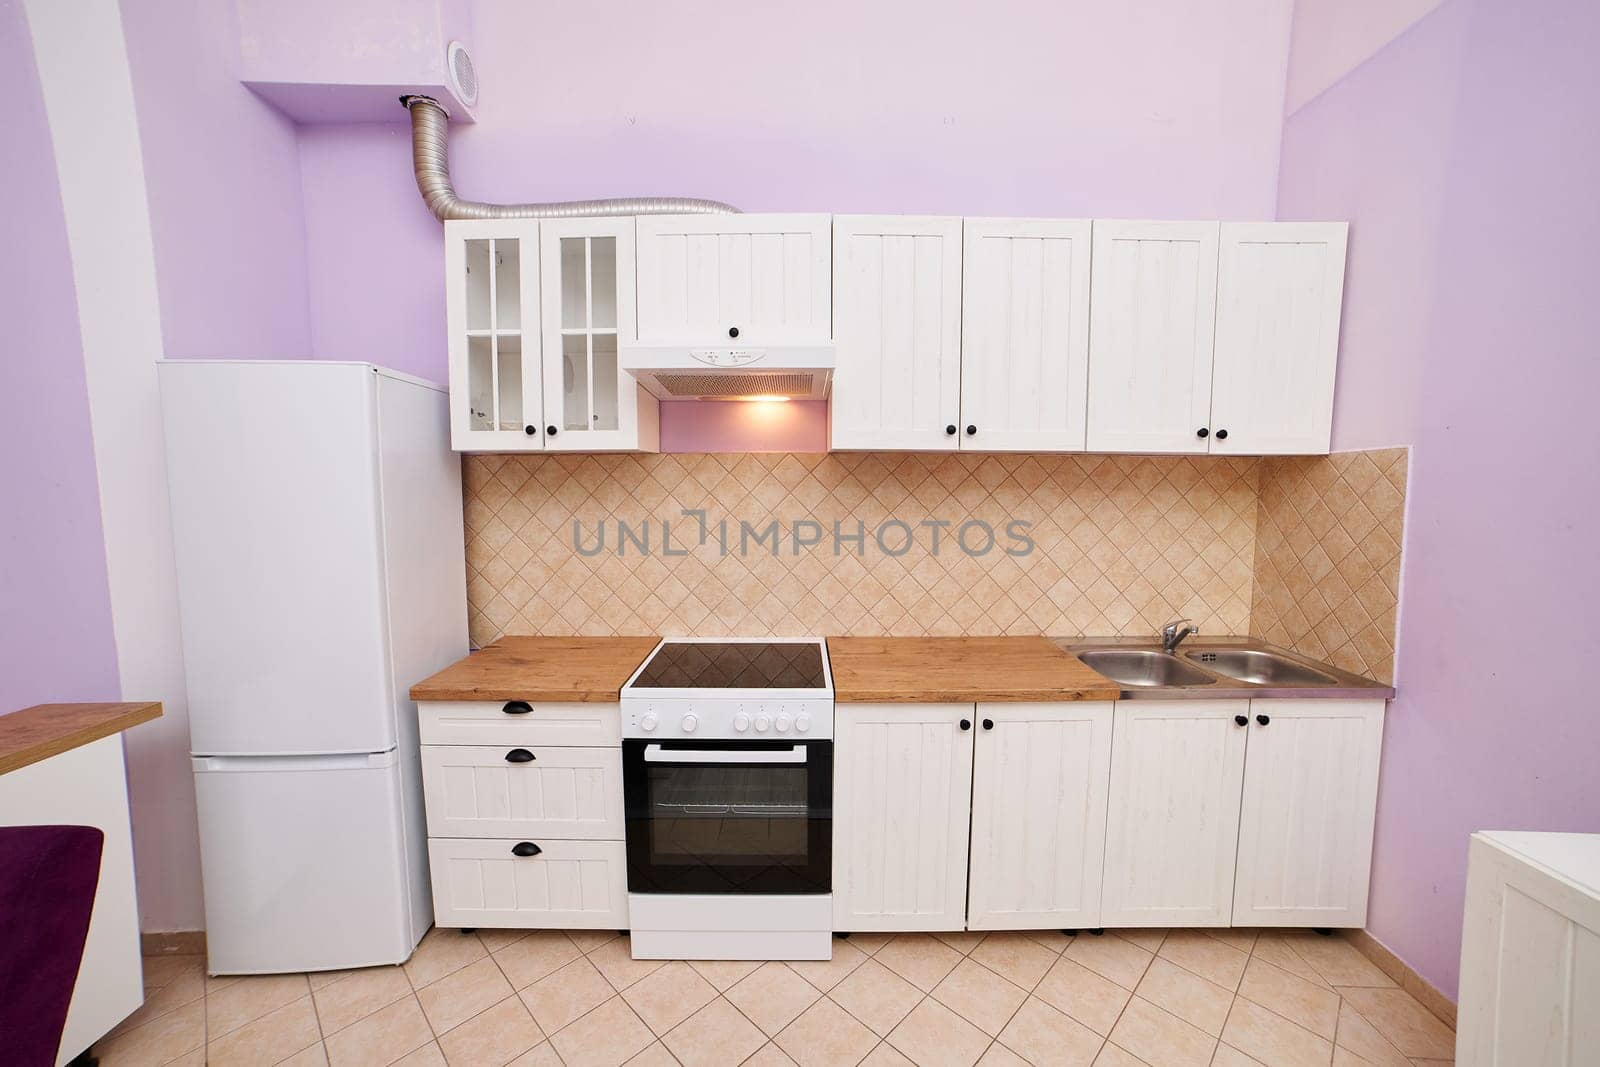 Purple kitchen with white cabinets, stove and refrigerator. High quality photo